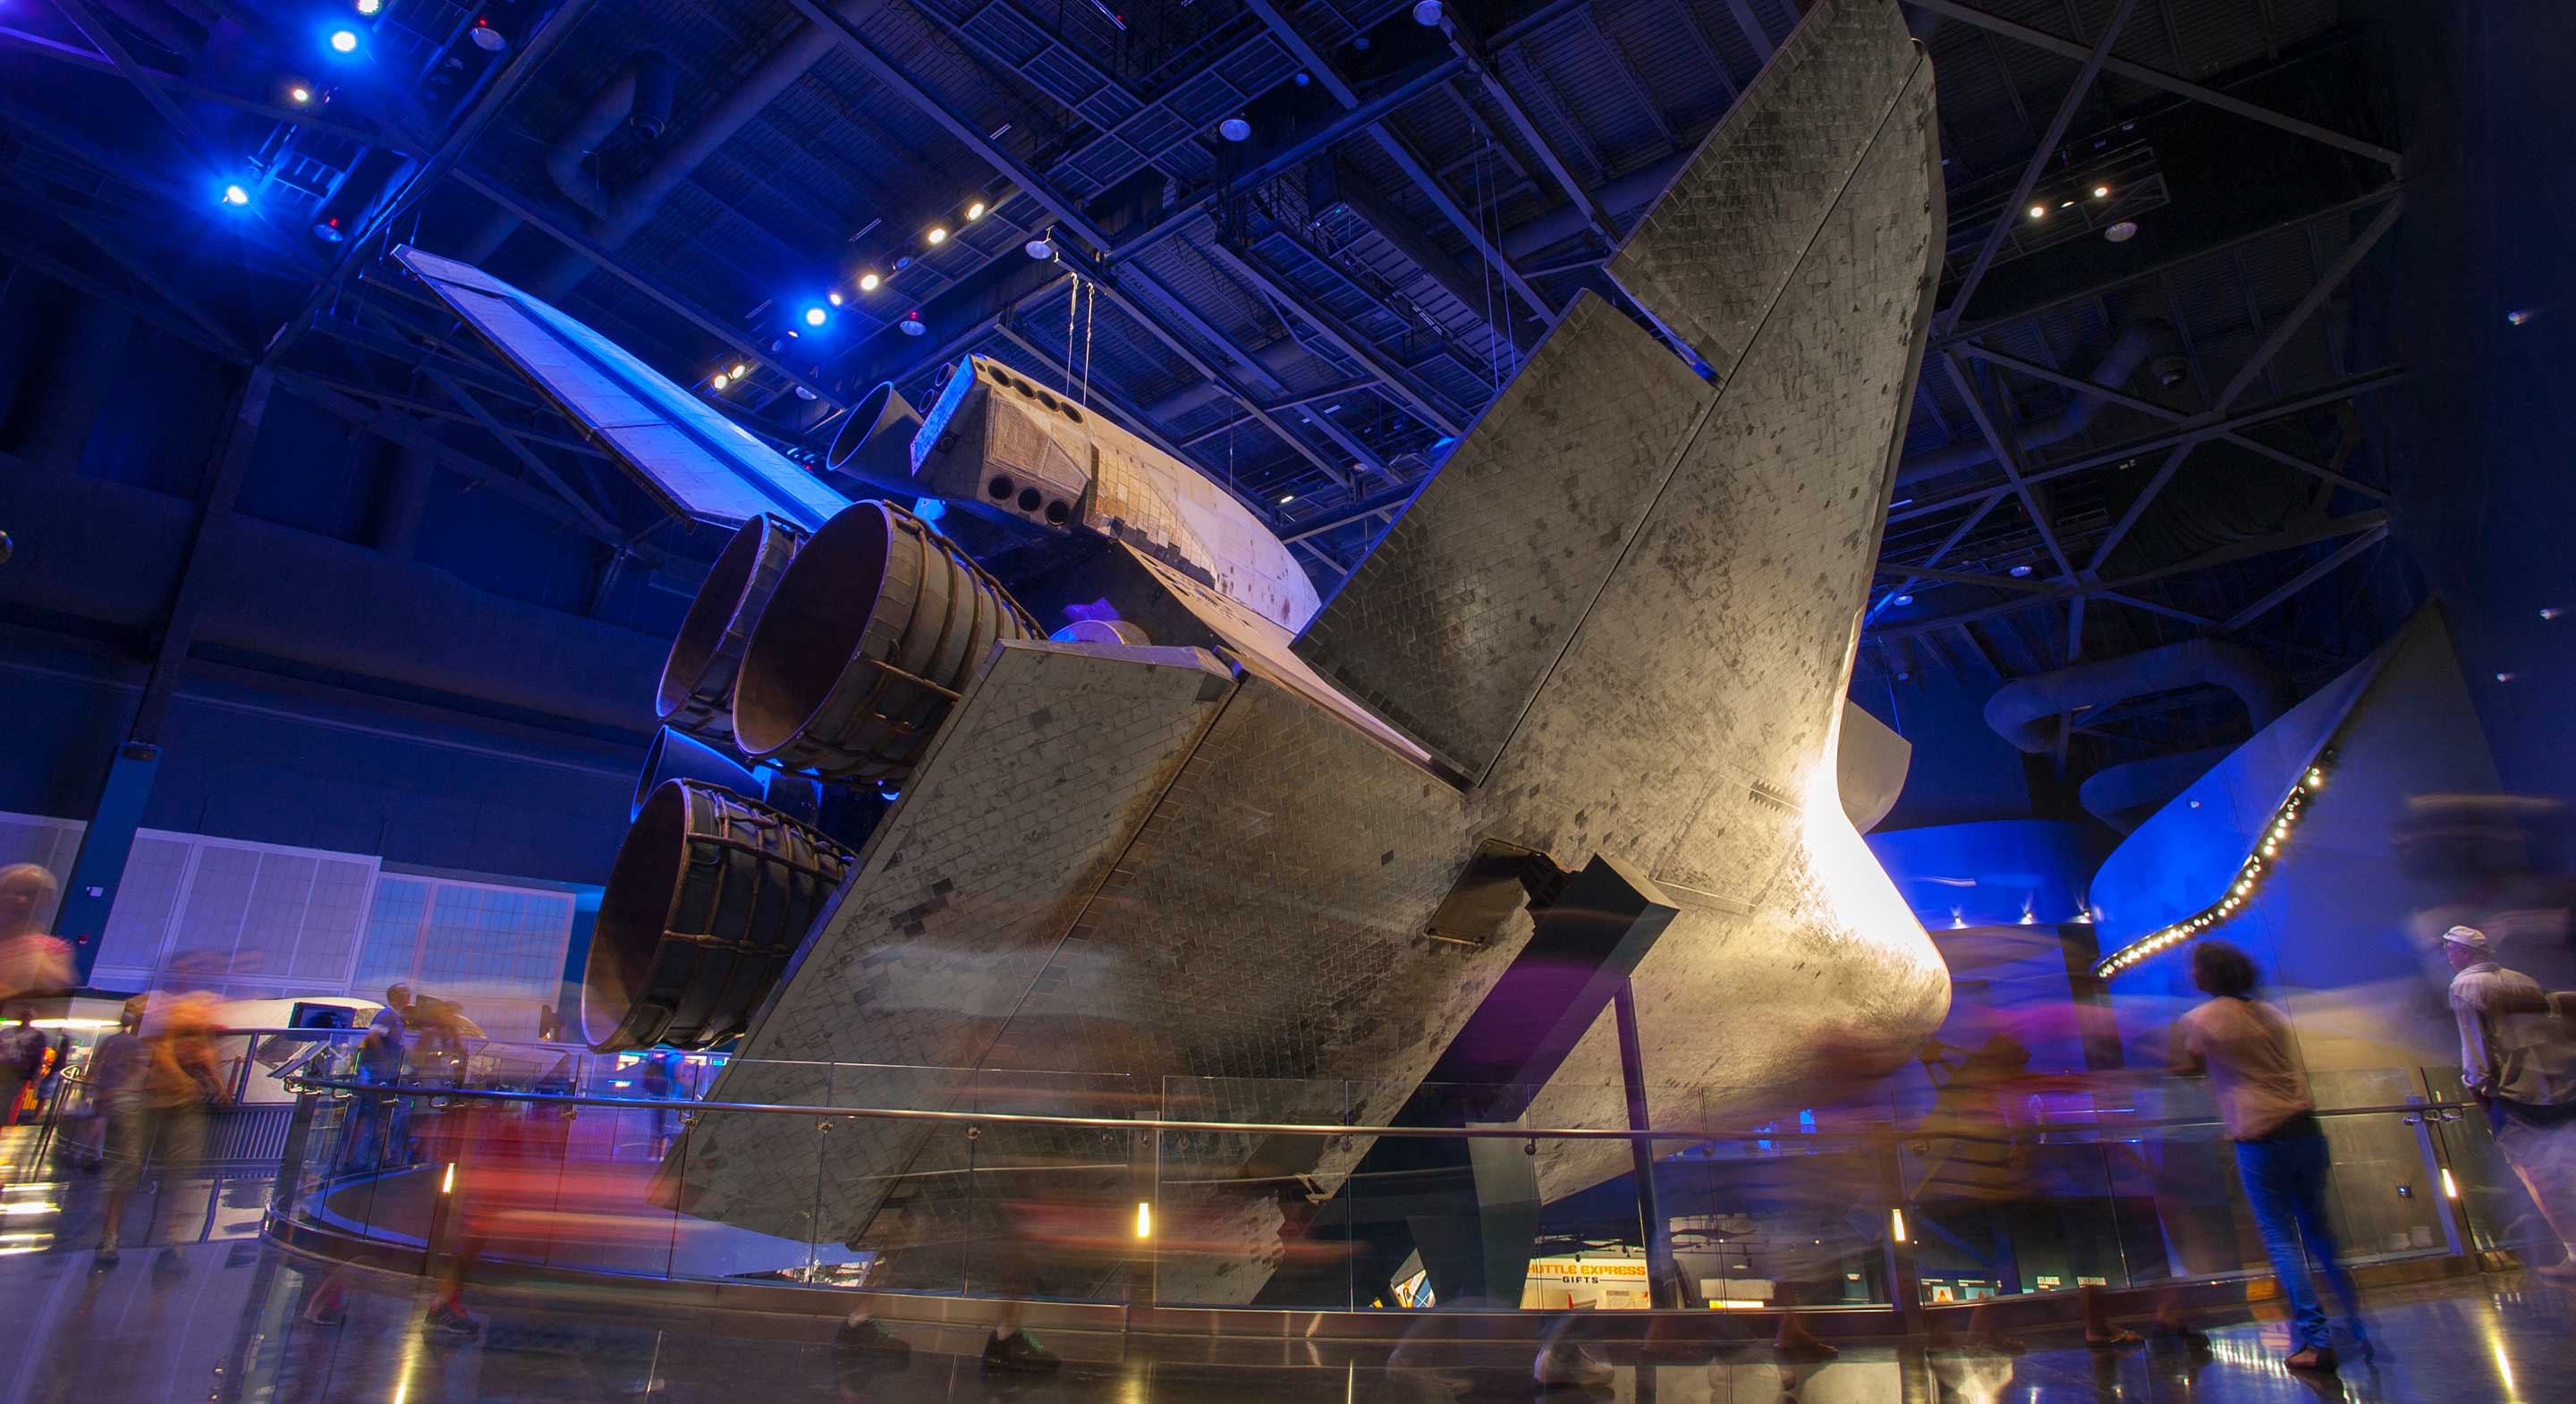 Kennedy-Space-Center-Visitor_Space-Shuttle-Atlantis_10